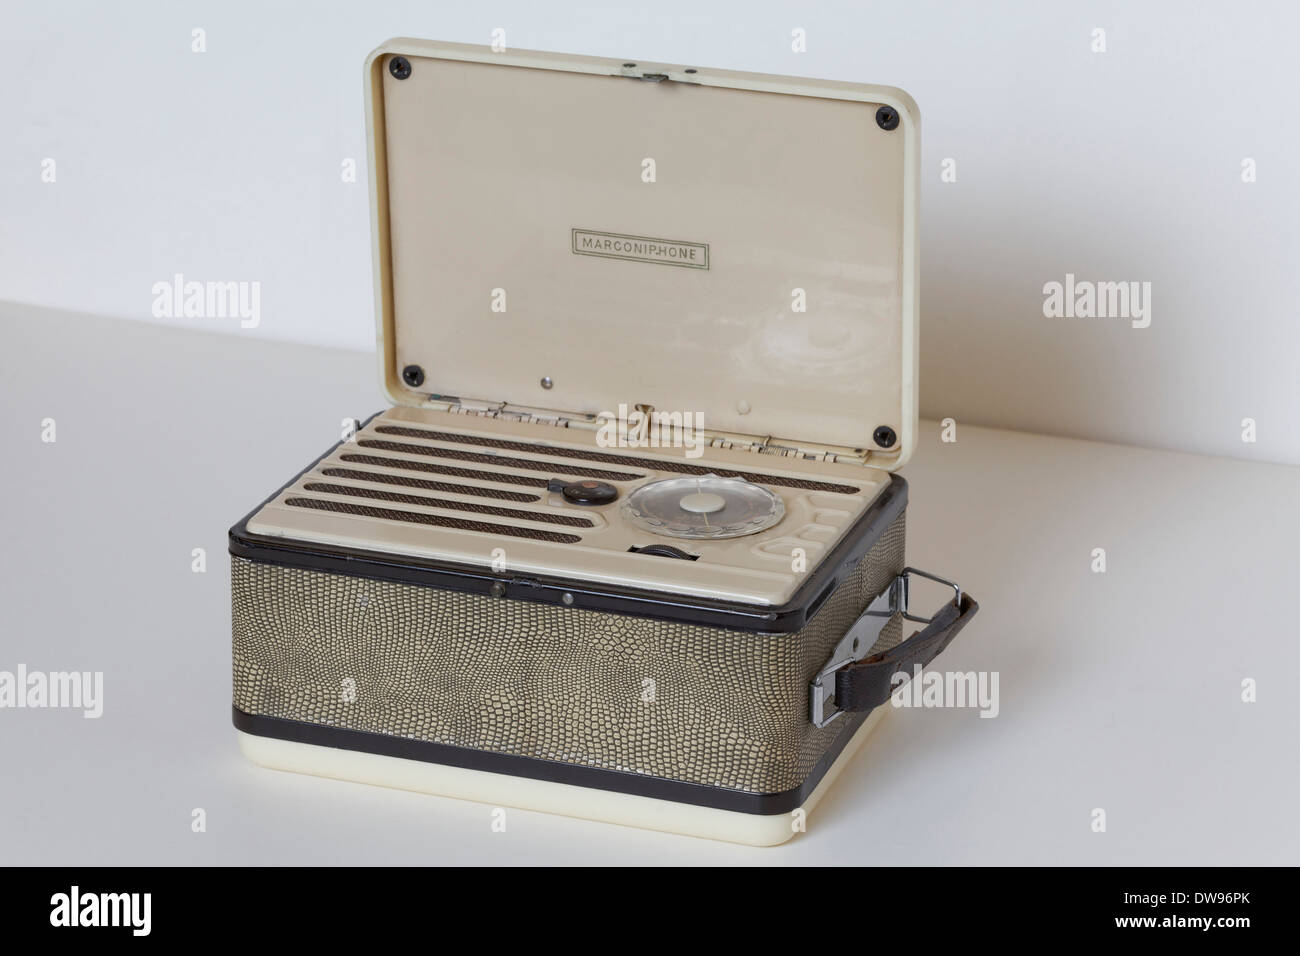 Marconiphone, model Personal K 12 P 20 B, battery powered portable radio from 1949, with imitation snakeskin Stock Photo